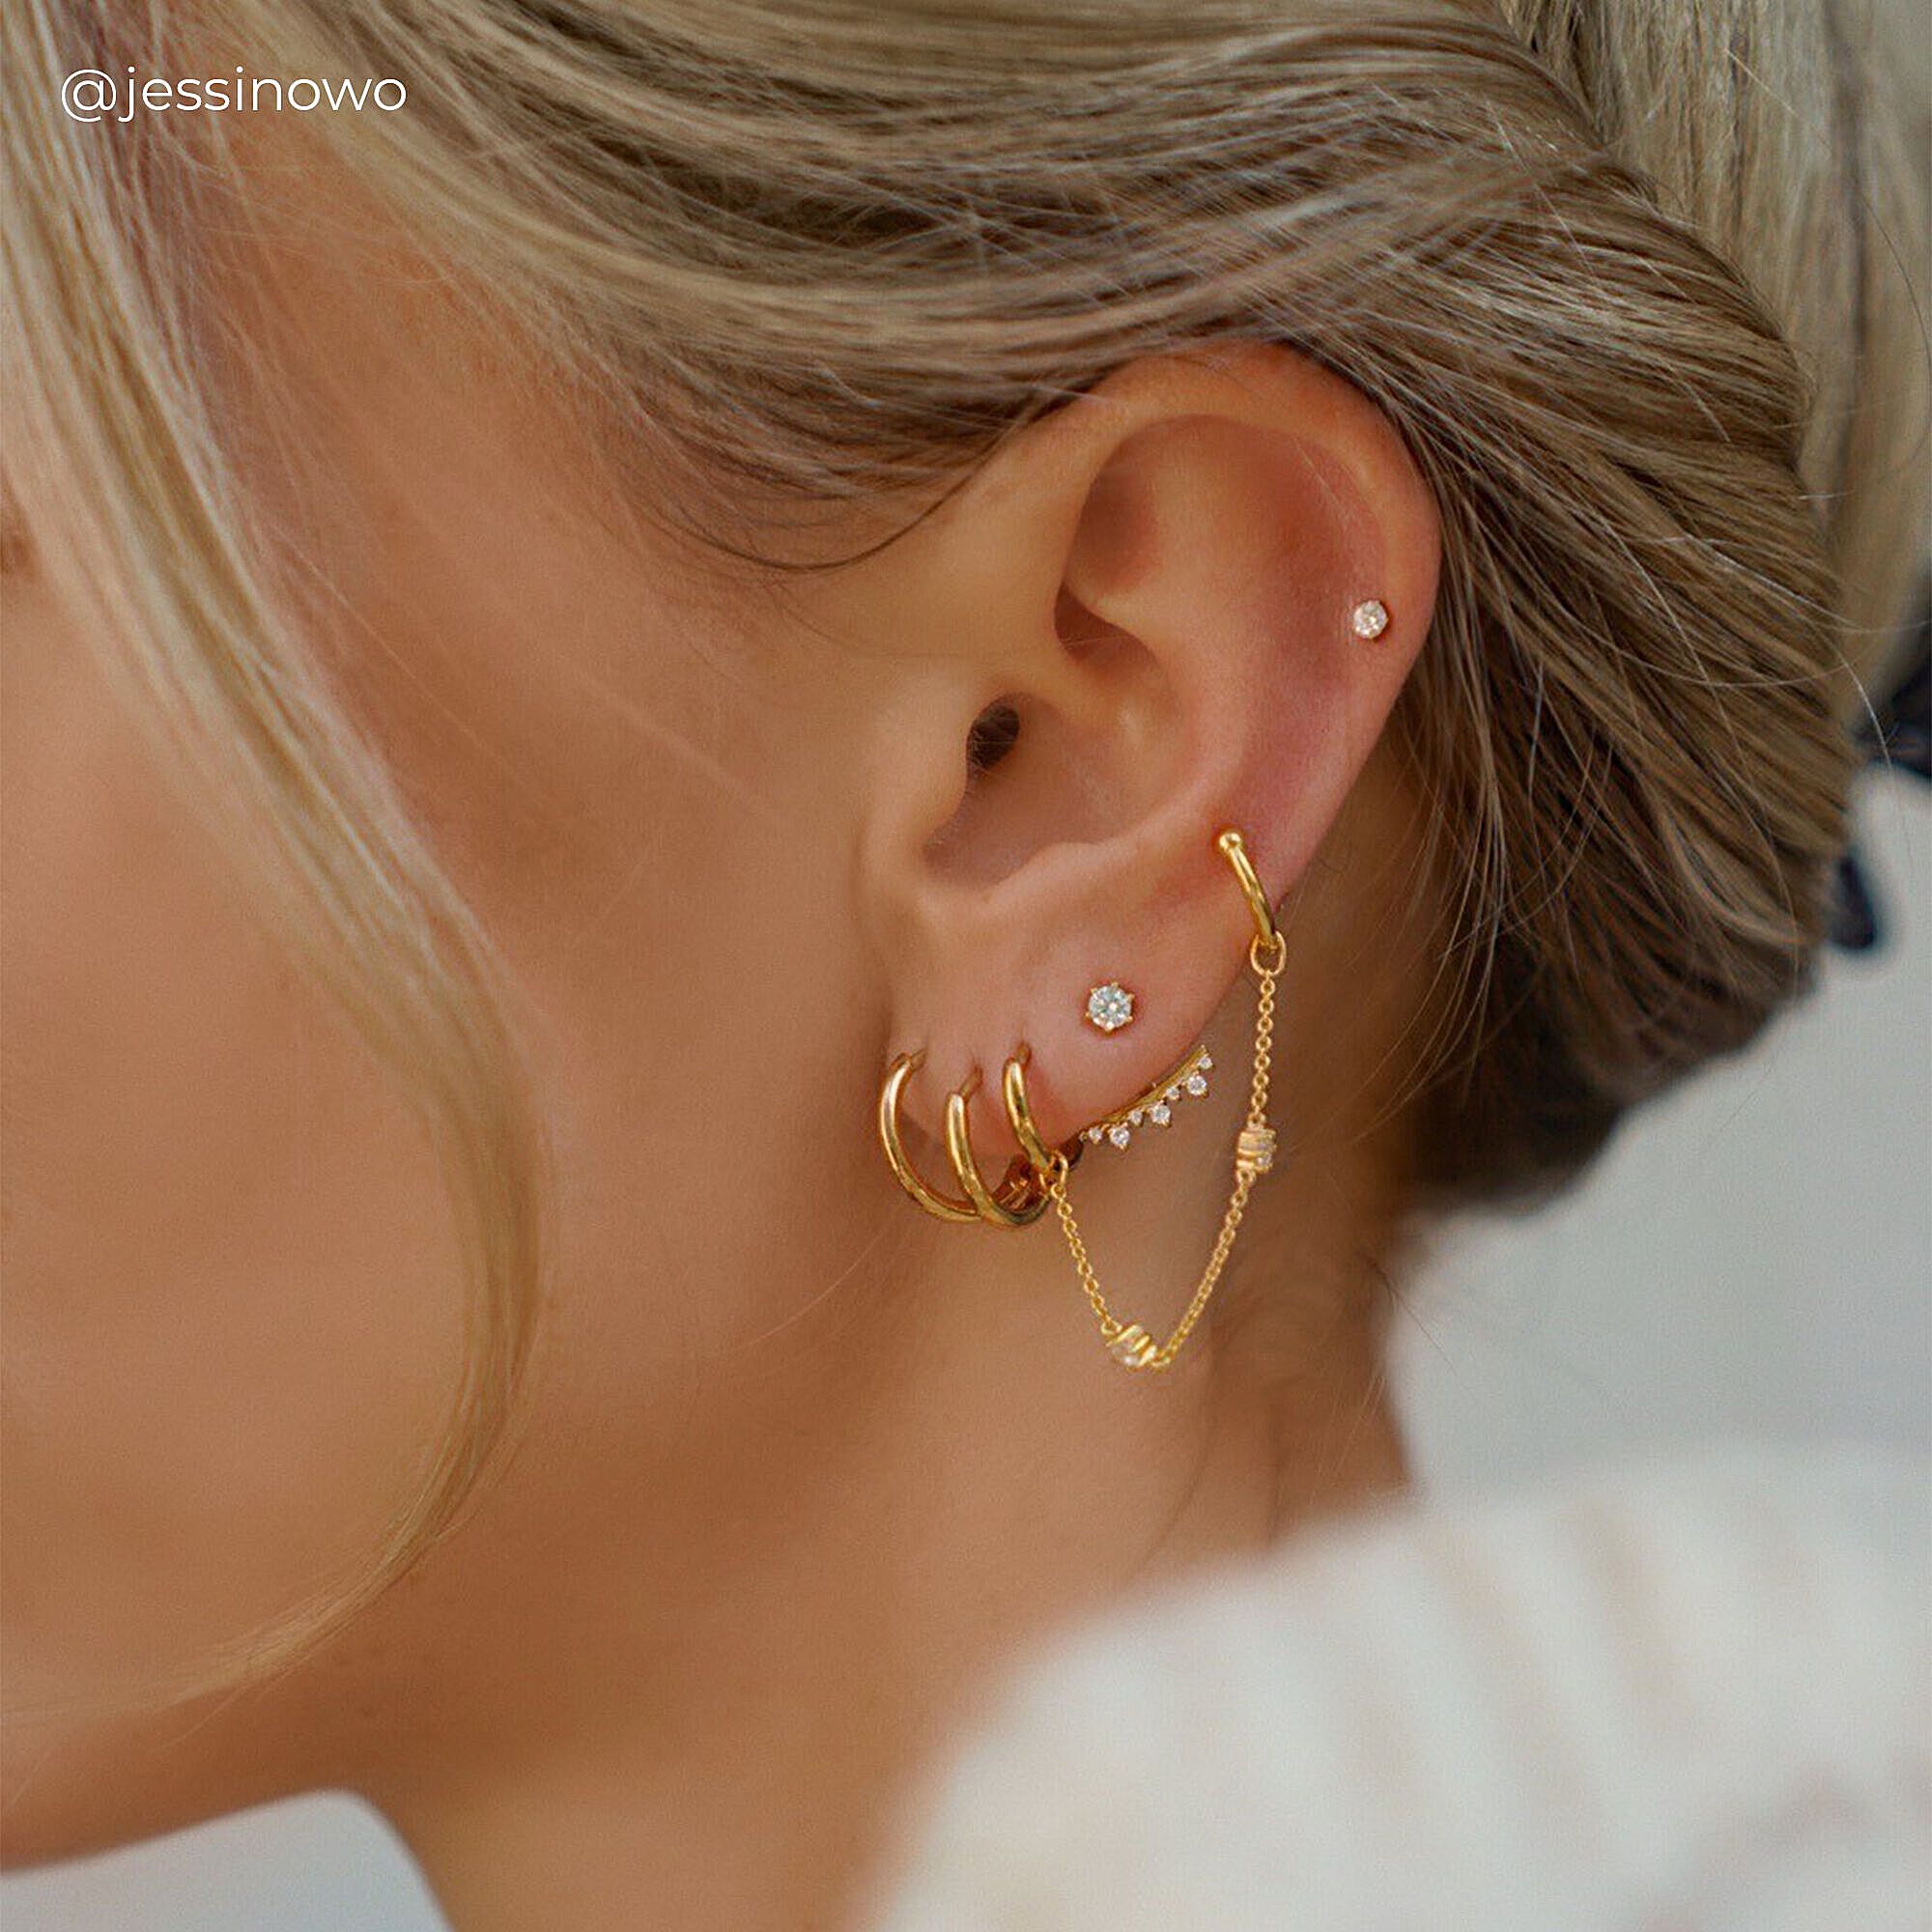 Ear stud SABO with │ in zirconia gold THOMAS centrepiece